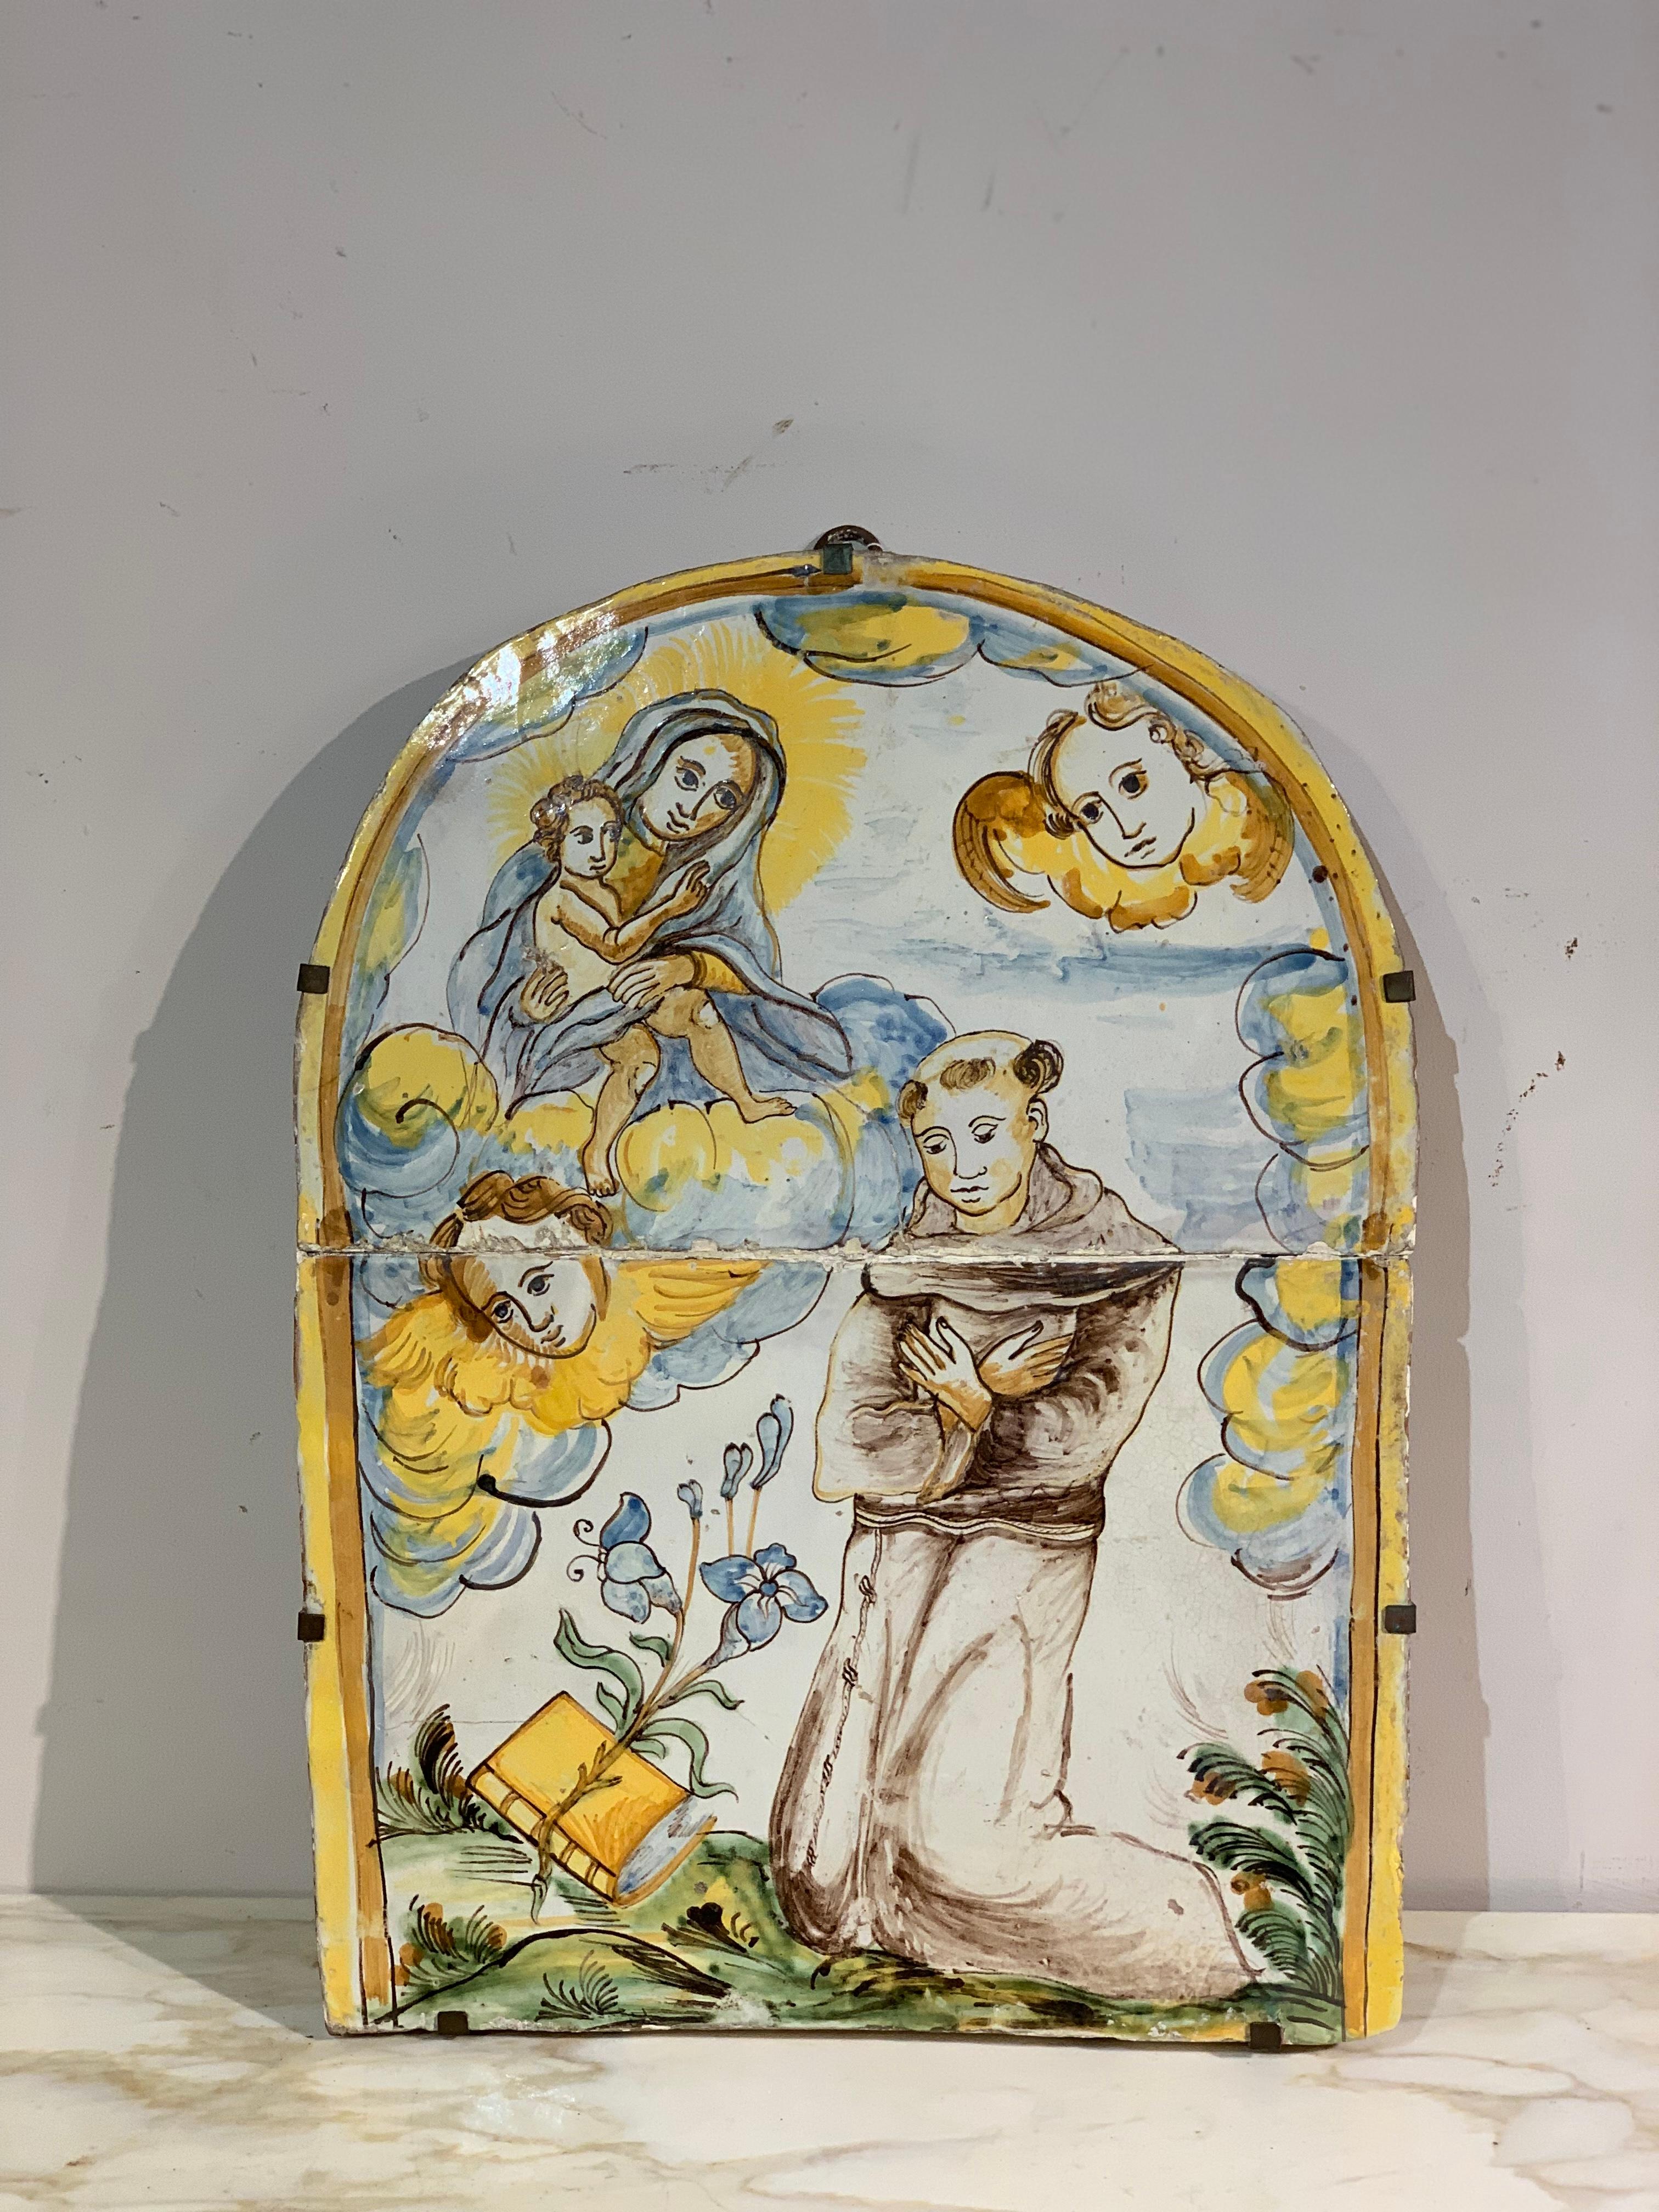 Tabernacle plaque in polychrome majolica depicting the Madonna and Saint Anthony of Padua. Montelupo manufacture from the end of the 1600s applied on a wooden support, divided into two sections.